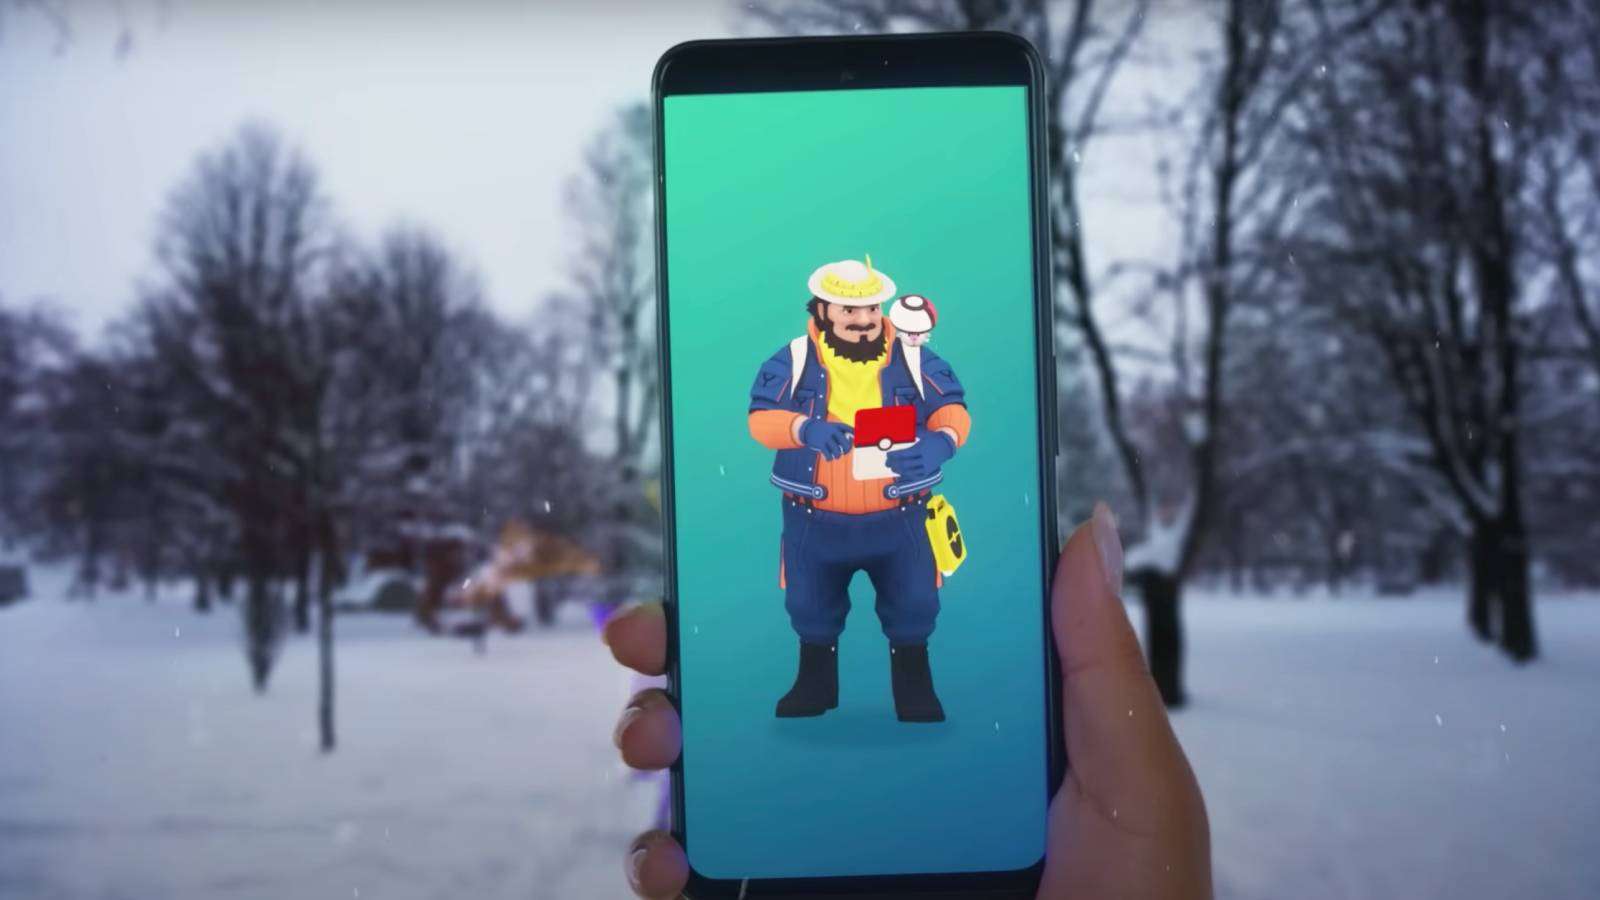 A Pokemon Go player holds up their phone in a snowy field, and the NPC Mateo is visible on the screen